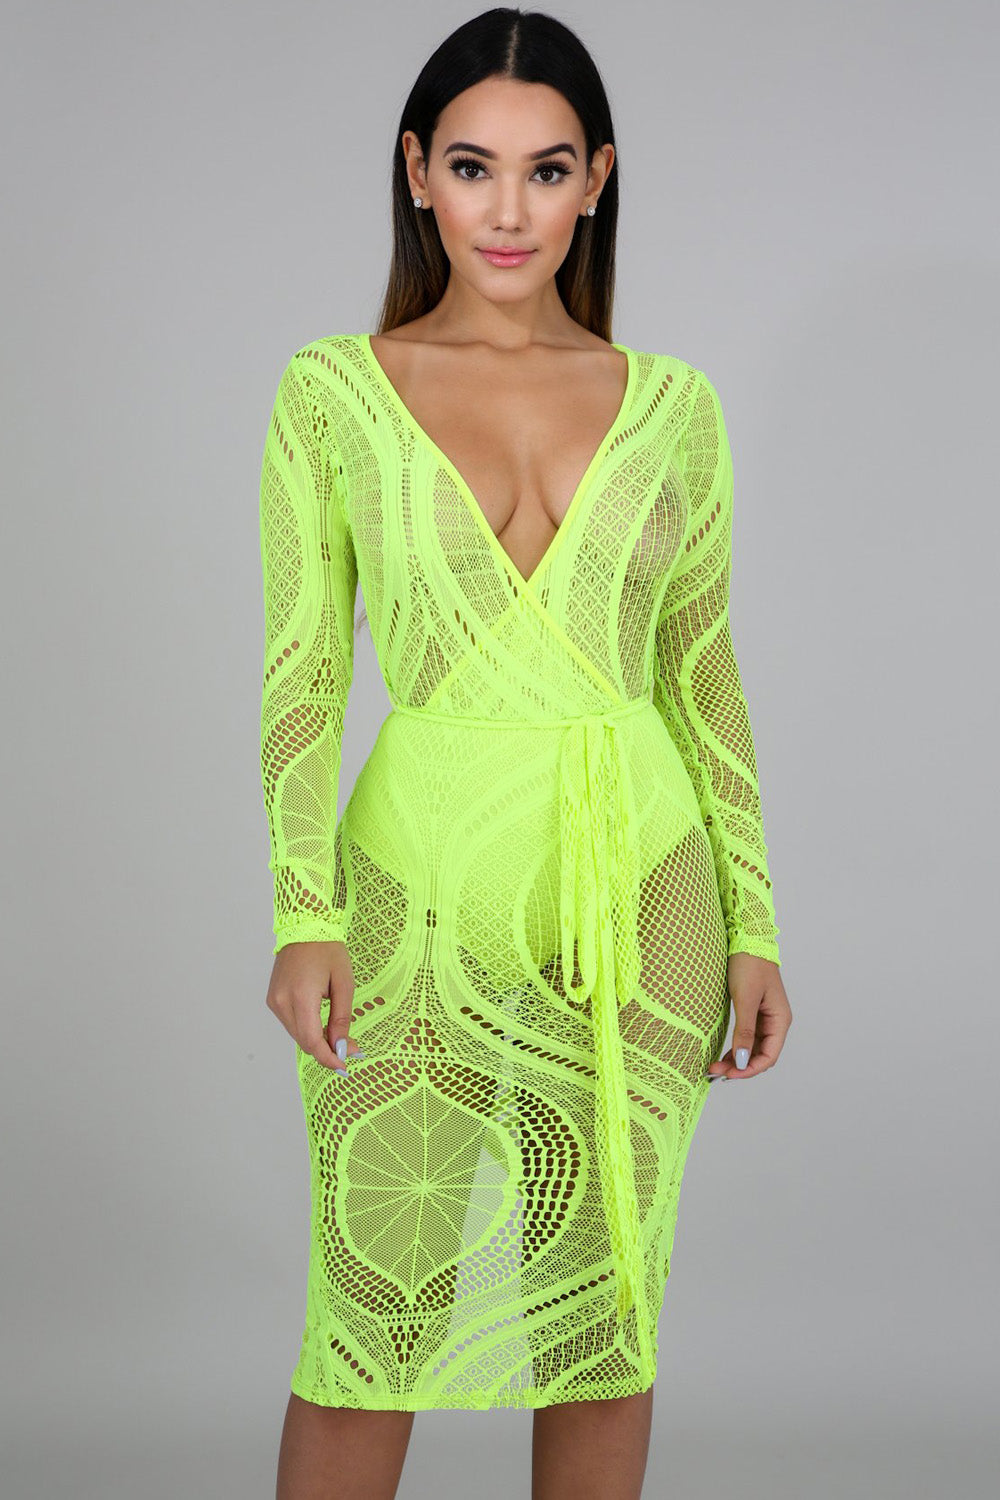 goPals sexy off the shoulder neon green sheer lace dress. 